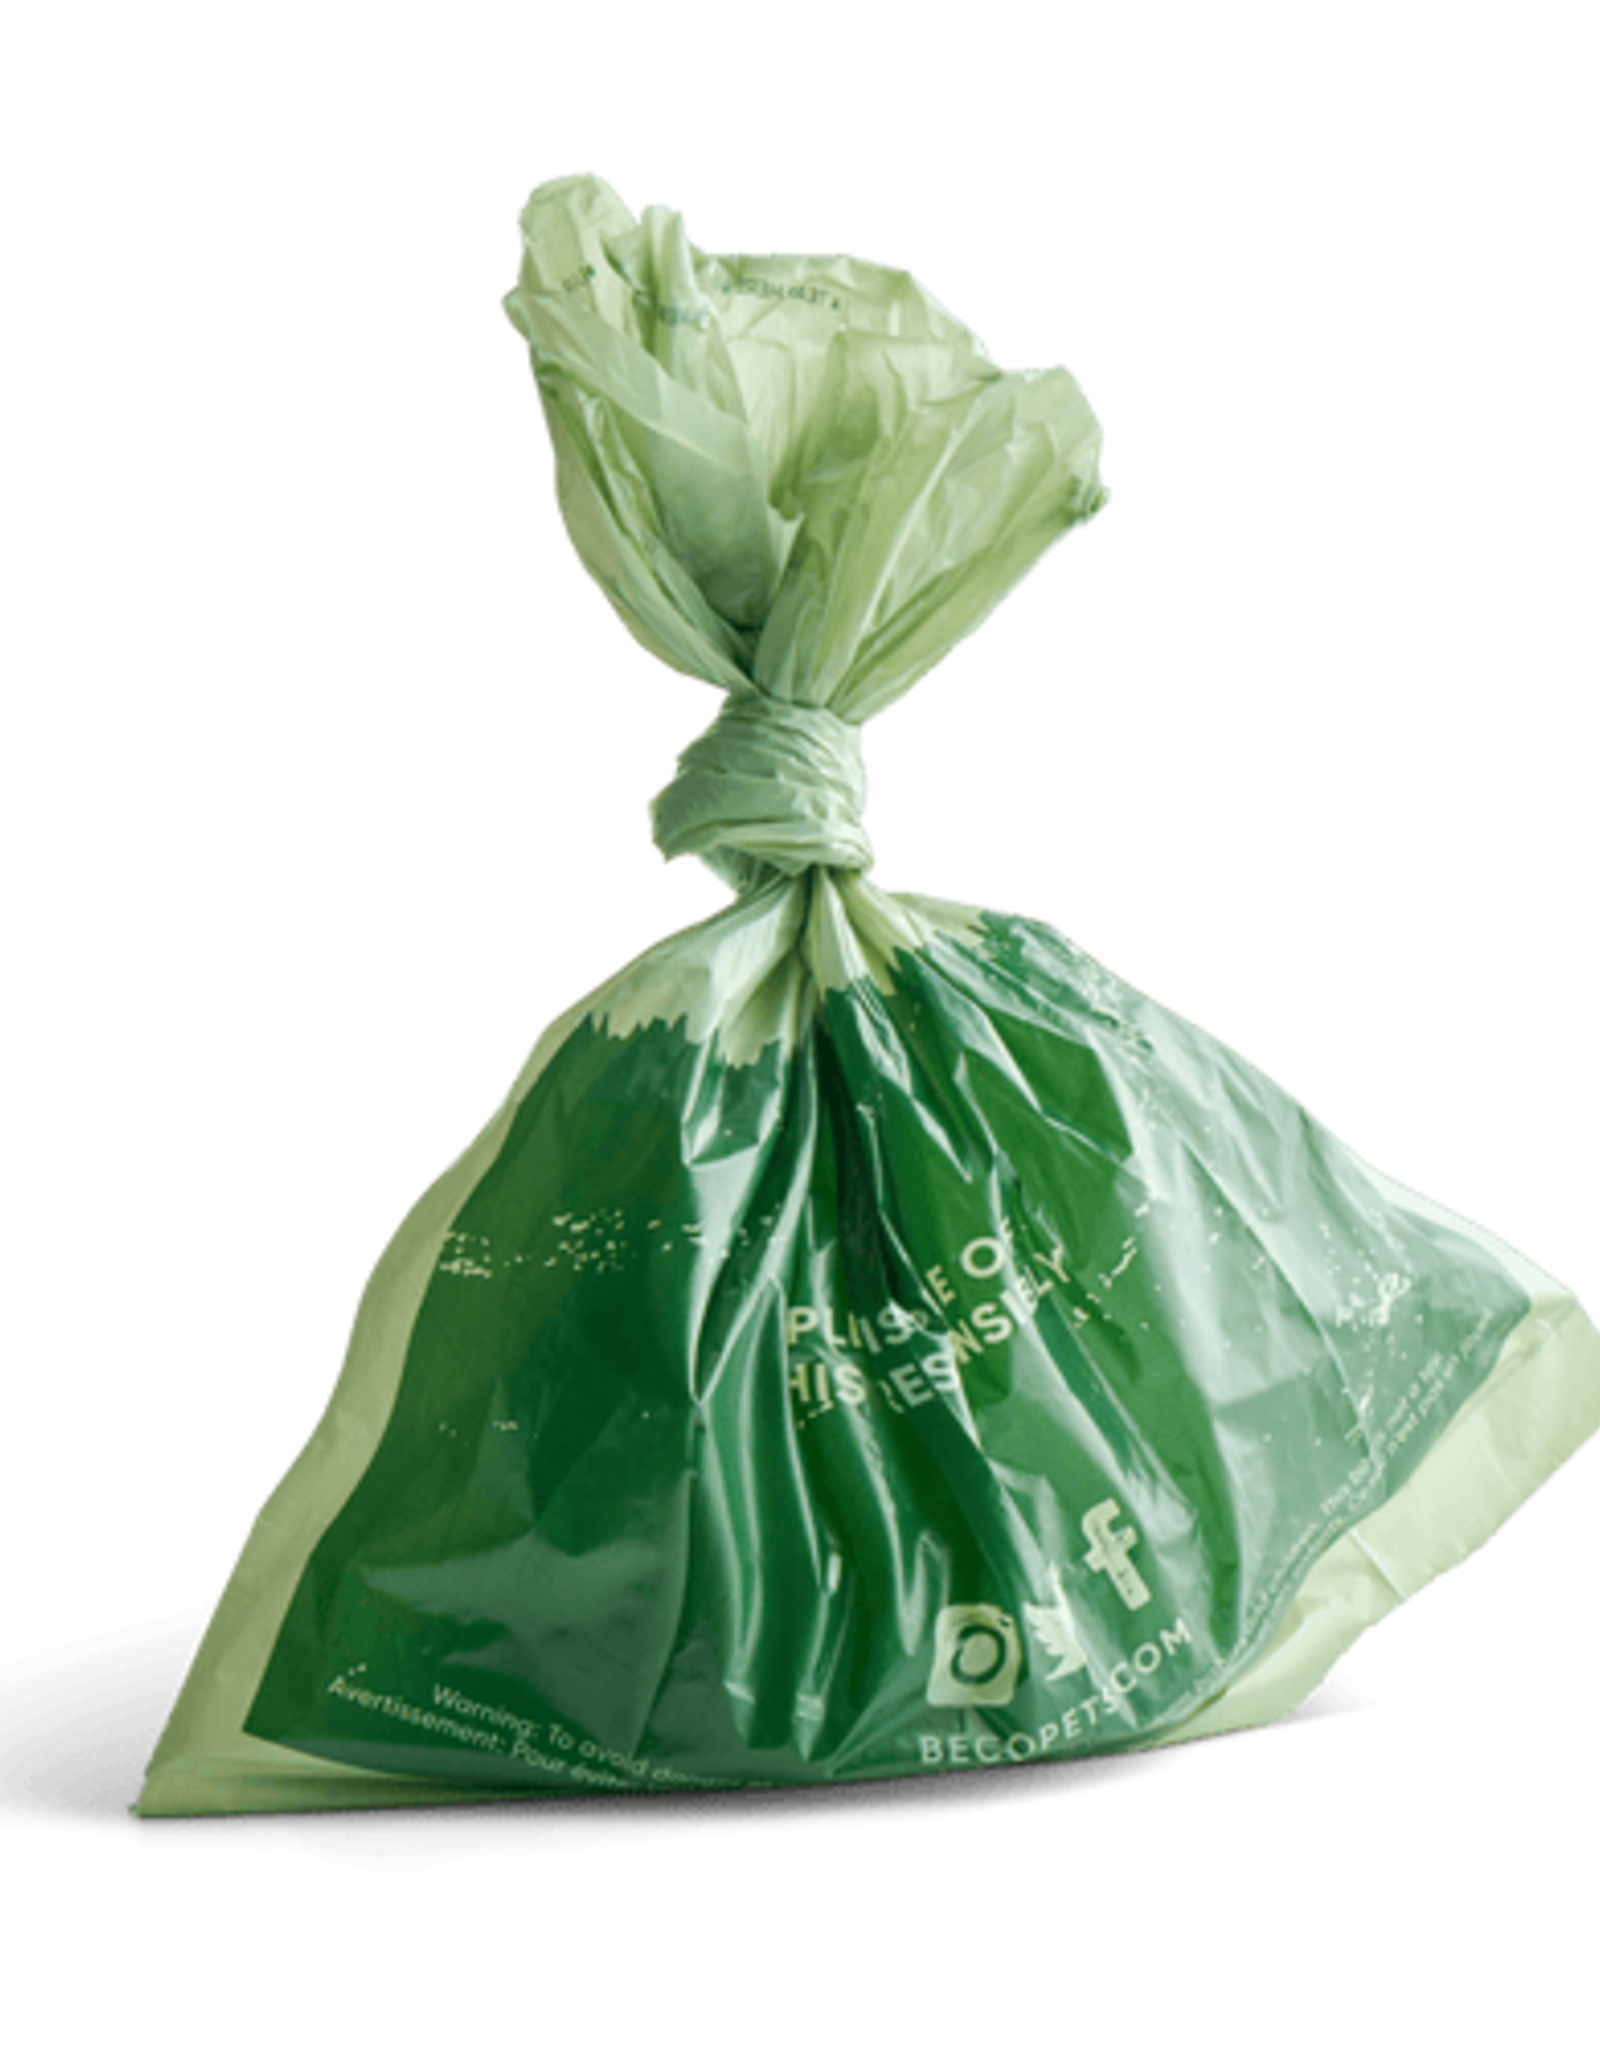 Beco Beco Bags Mint Scented Poop Bags 120 ct